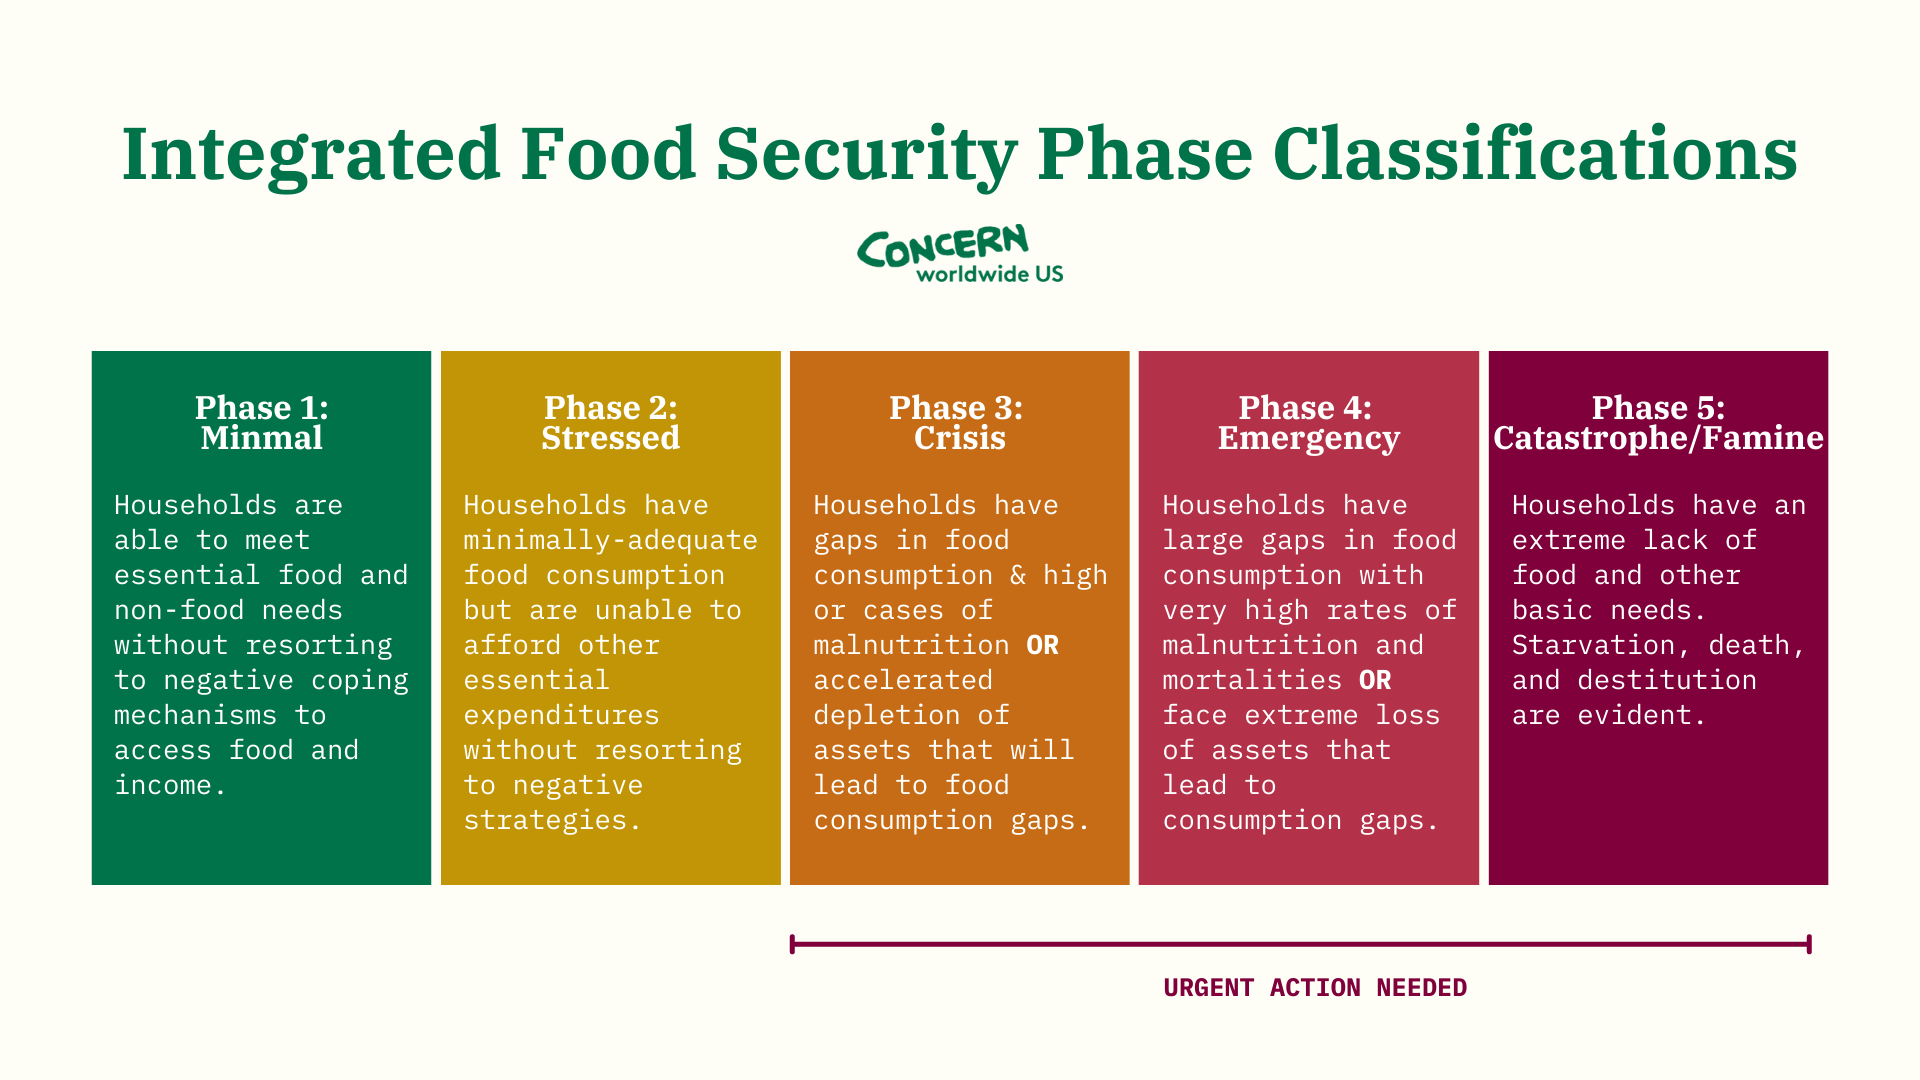 Integrated Food Security Phase Classification chart